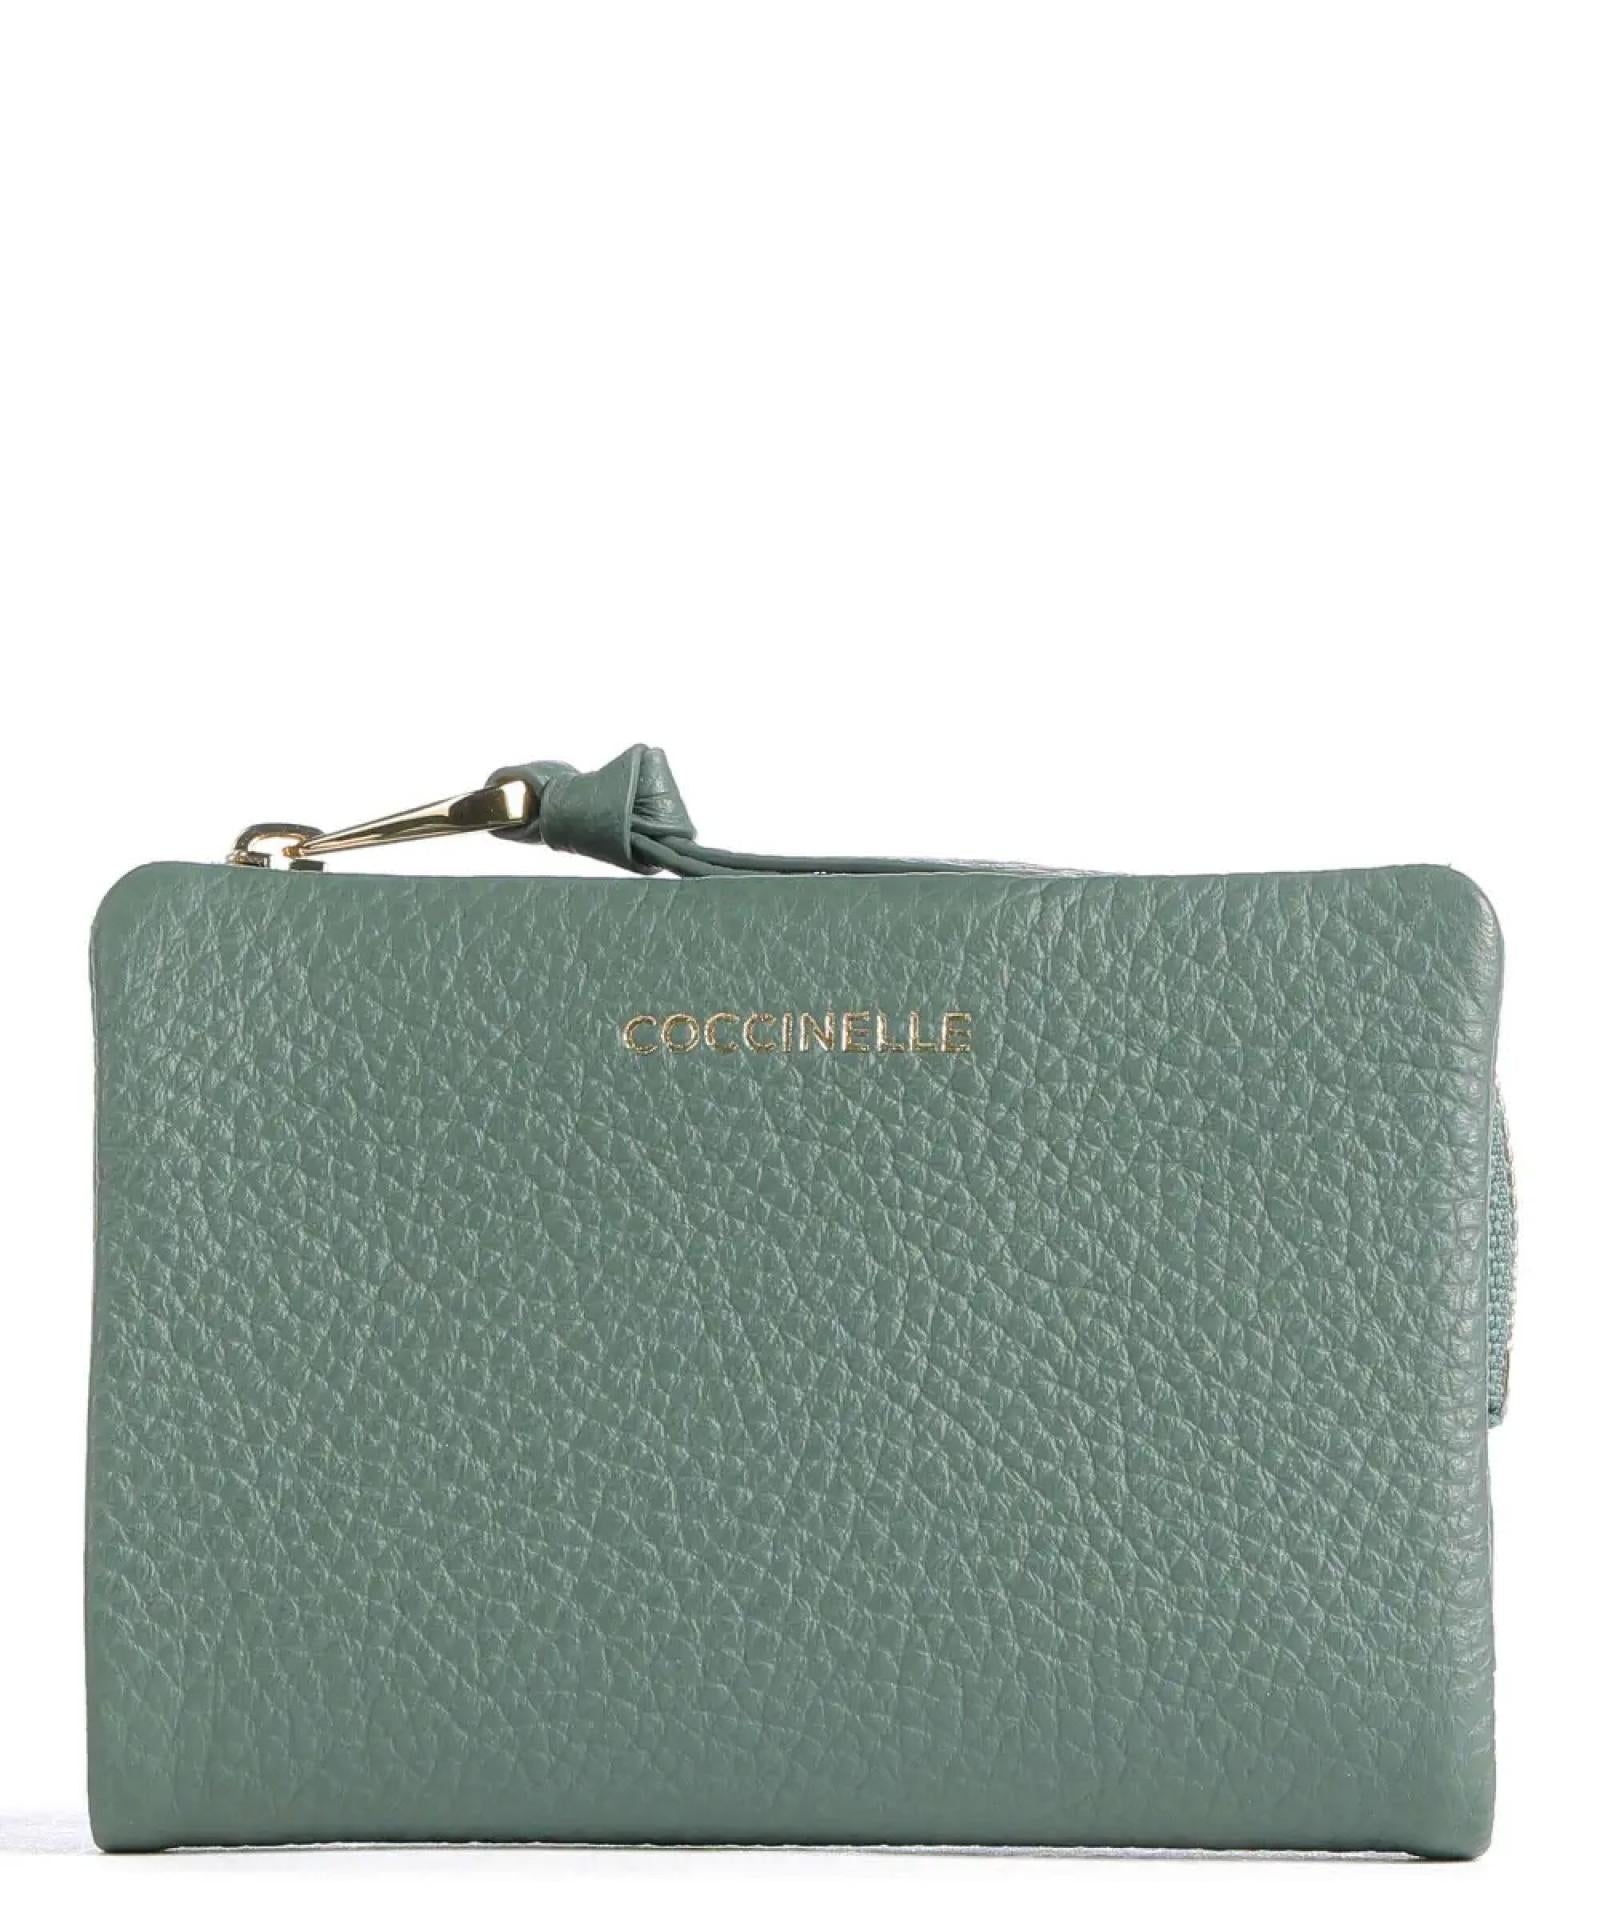 Coccinelle WALLET GRAINED LEATHER / KALE GREEN